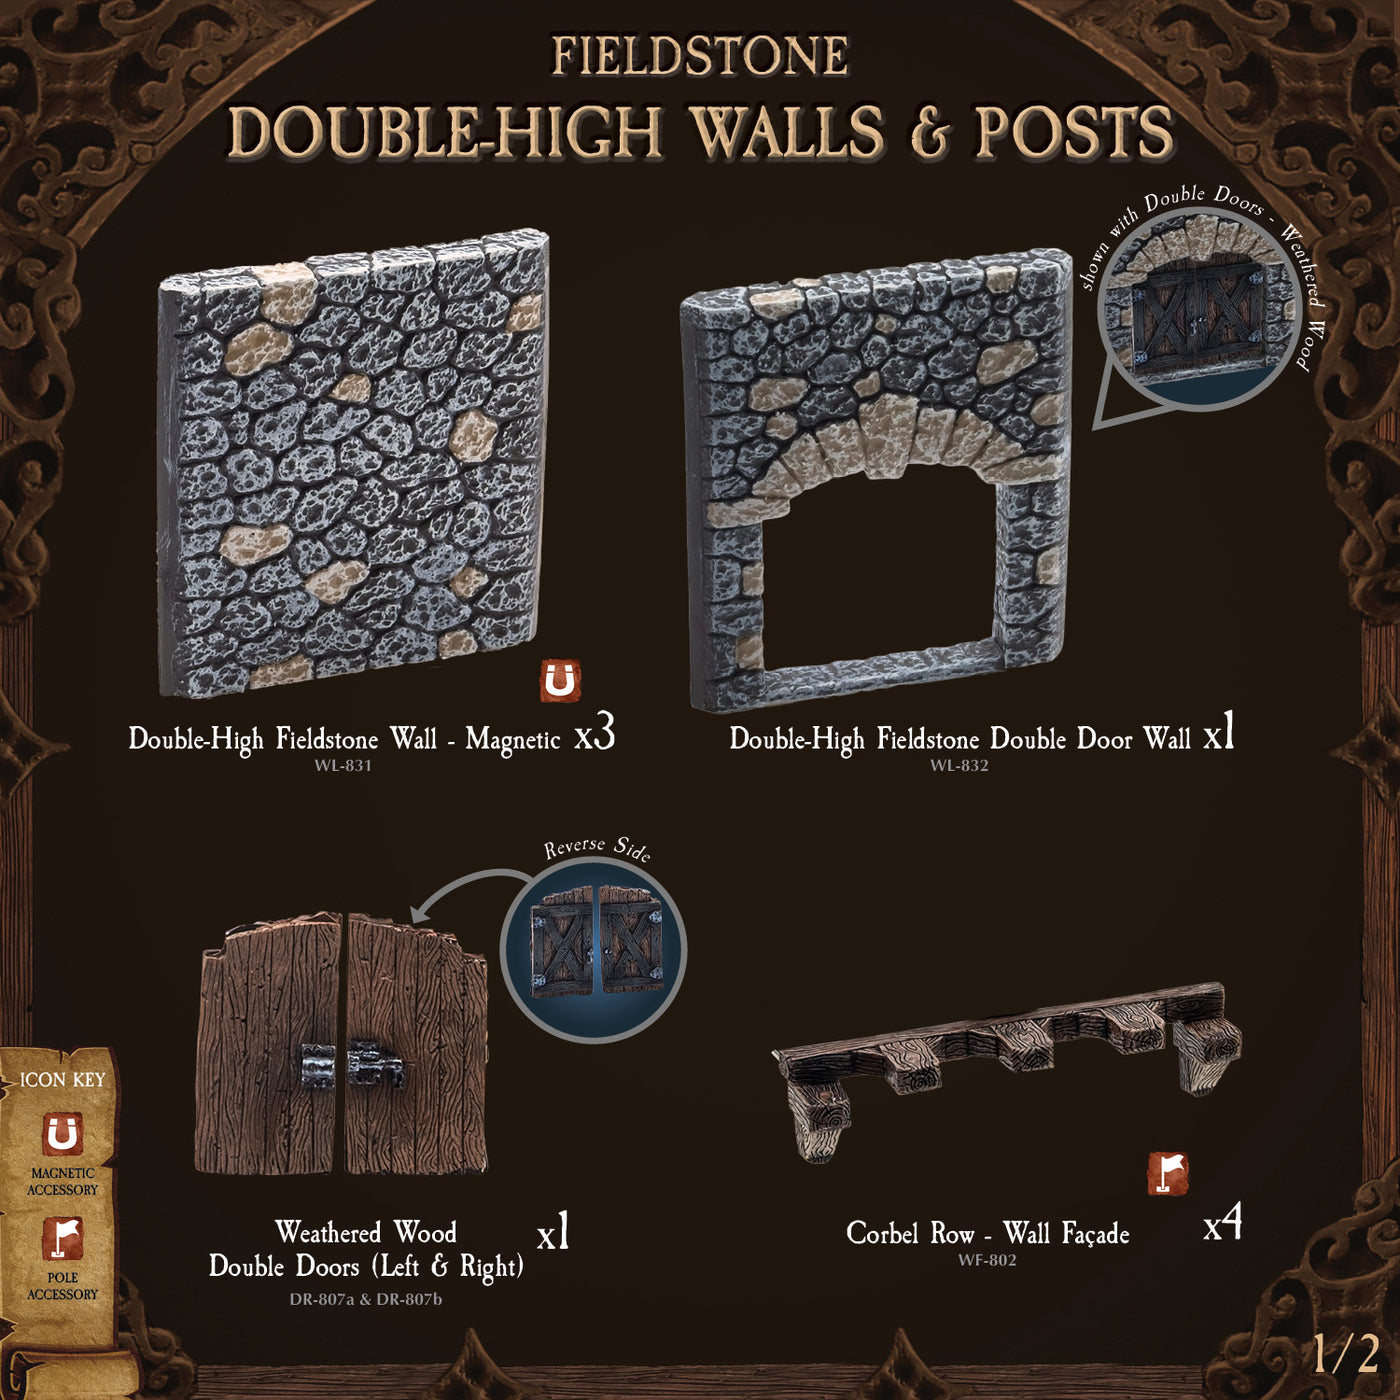 Fieldstone - Double High Walls & Posts (Painted)